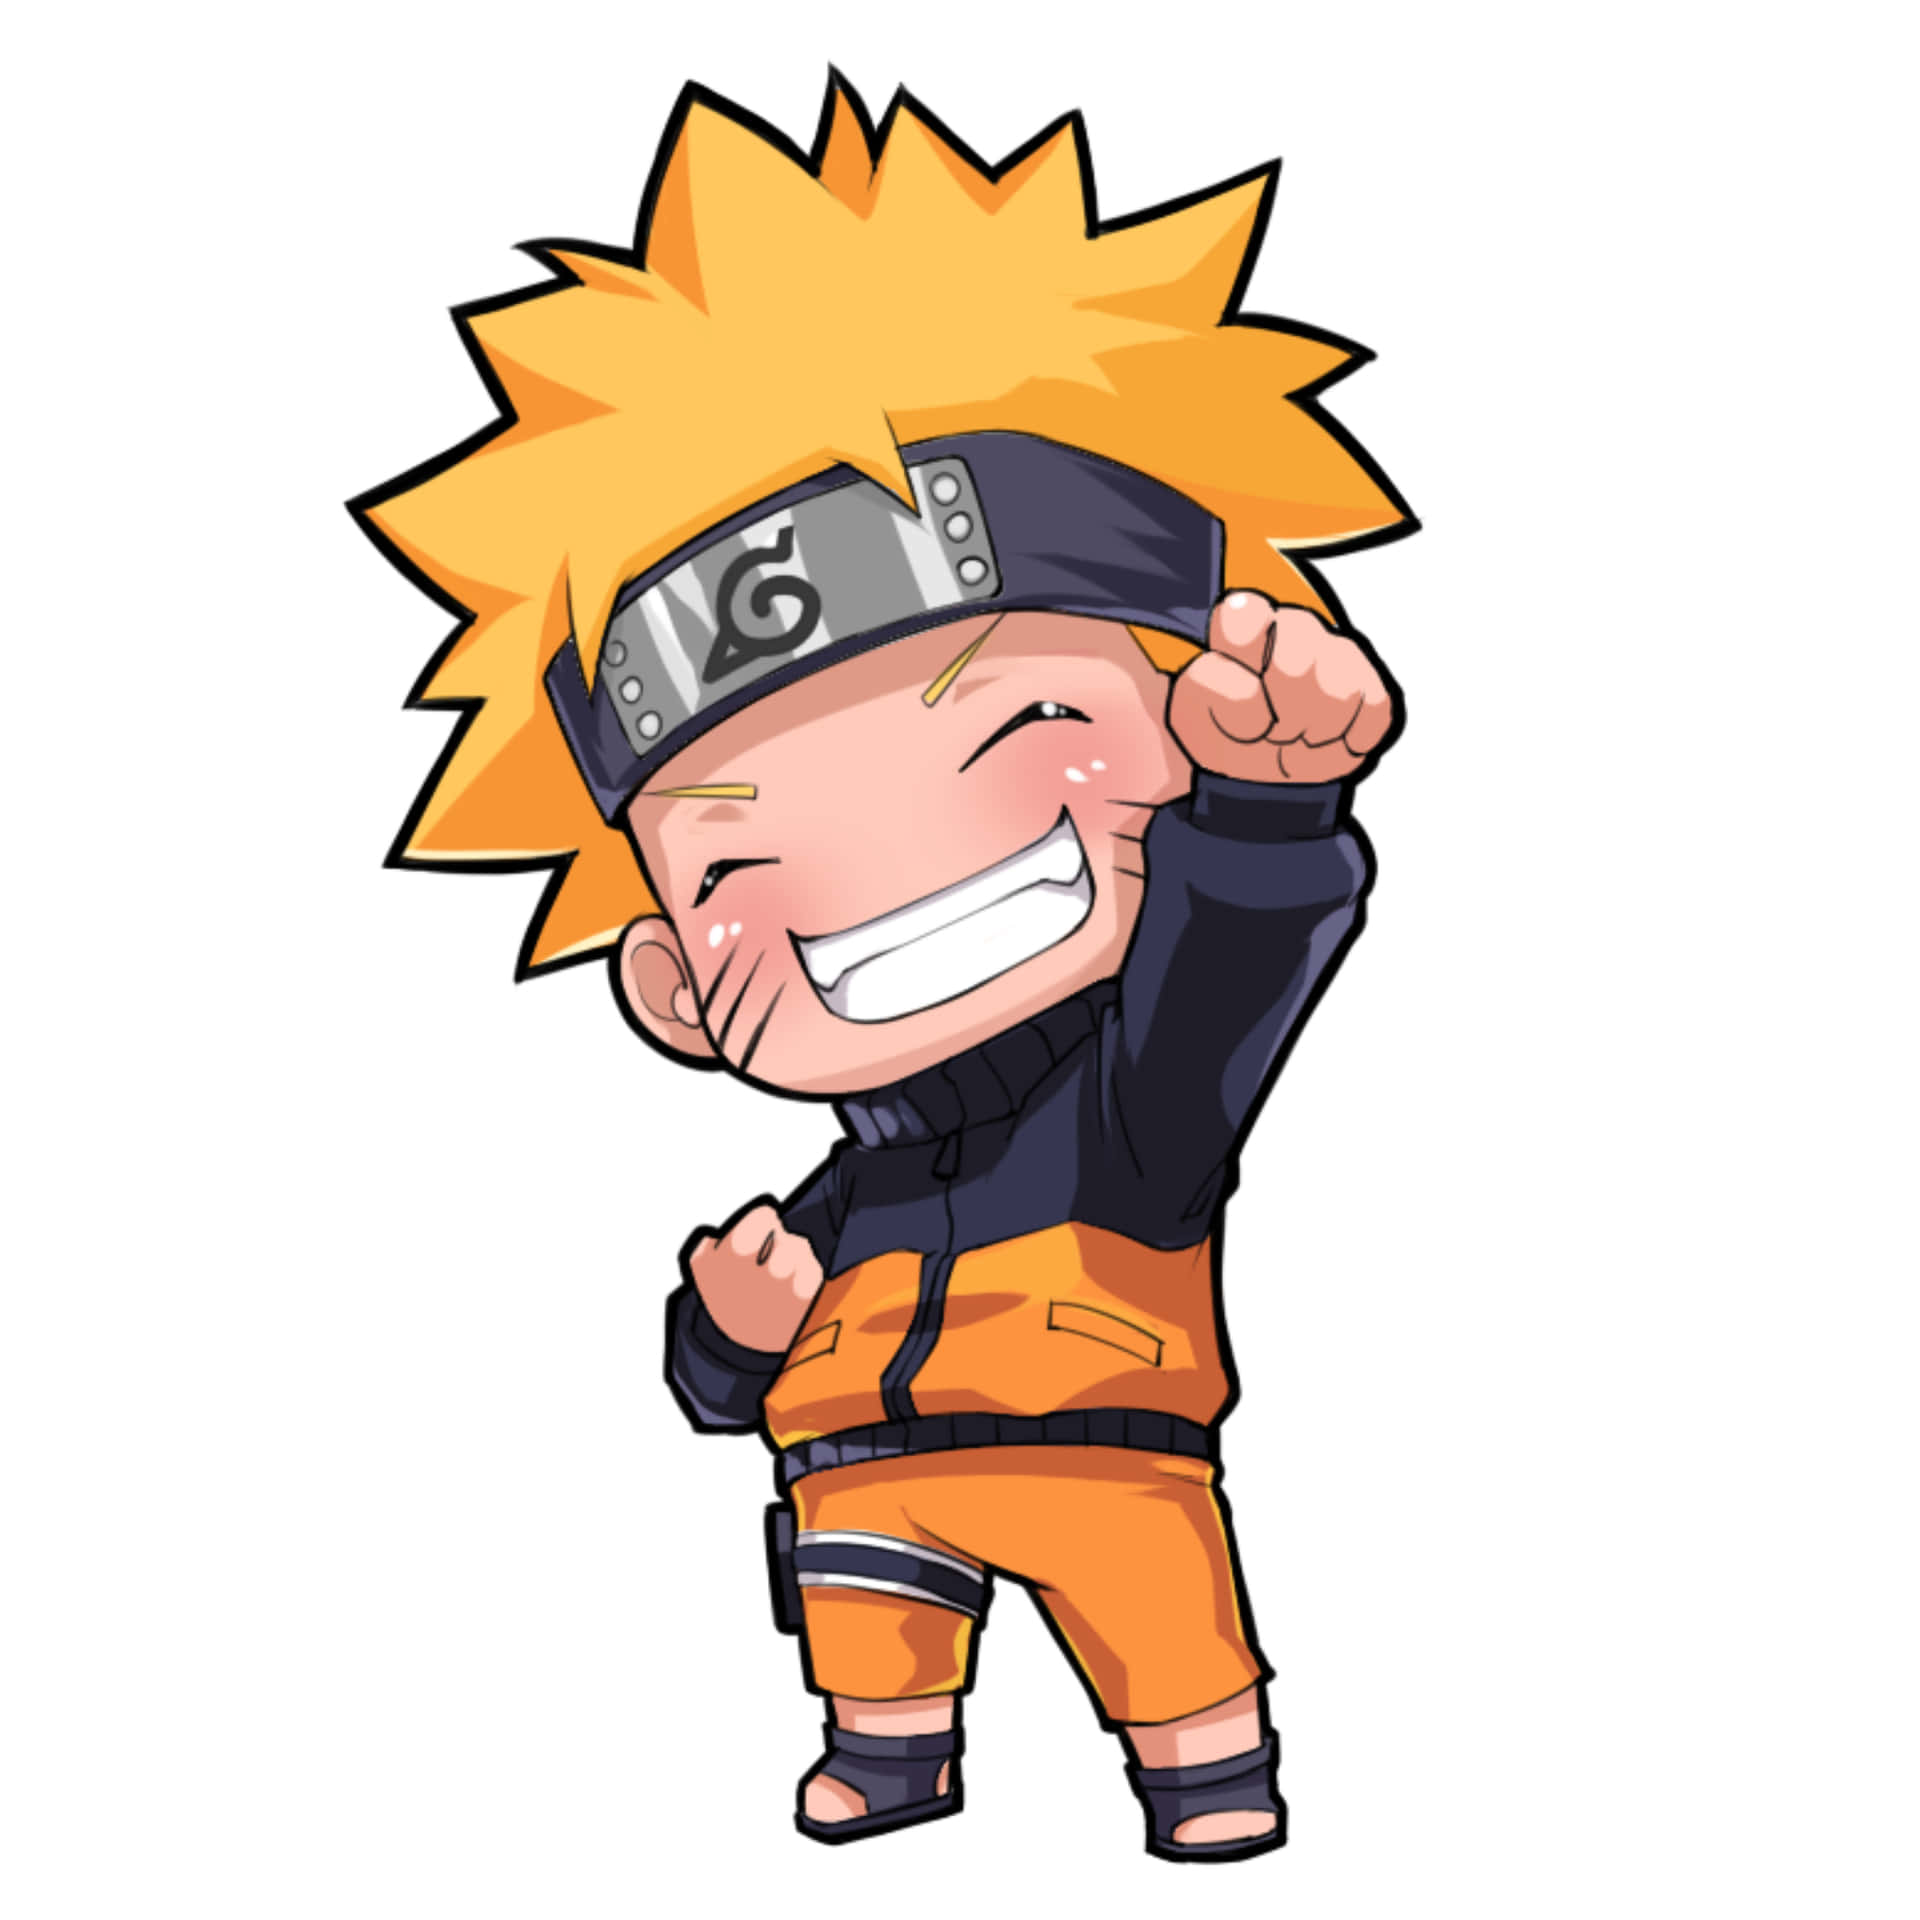 Beloved characters from the Naruto anime series, now in chibi form! Wallpaper